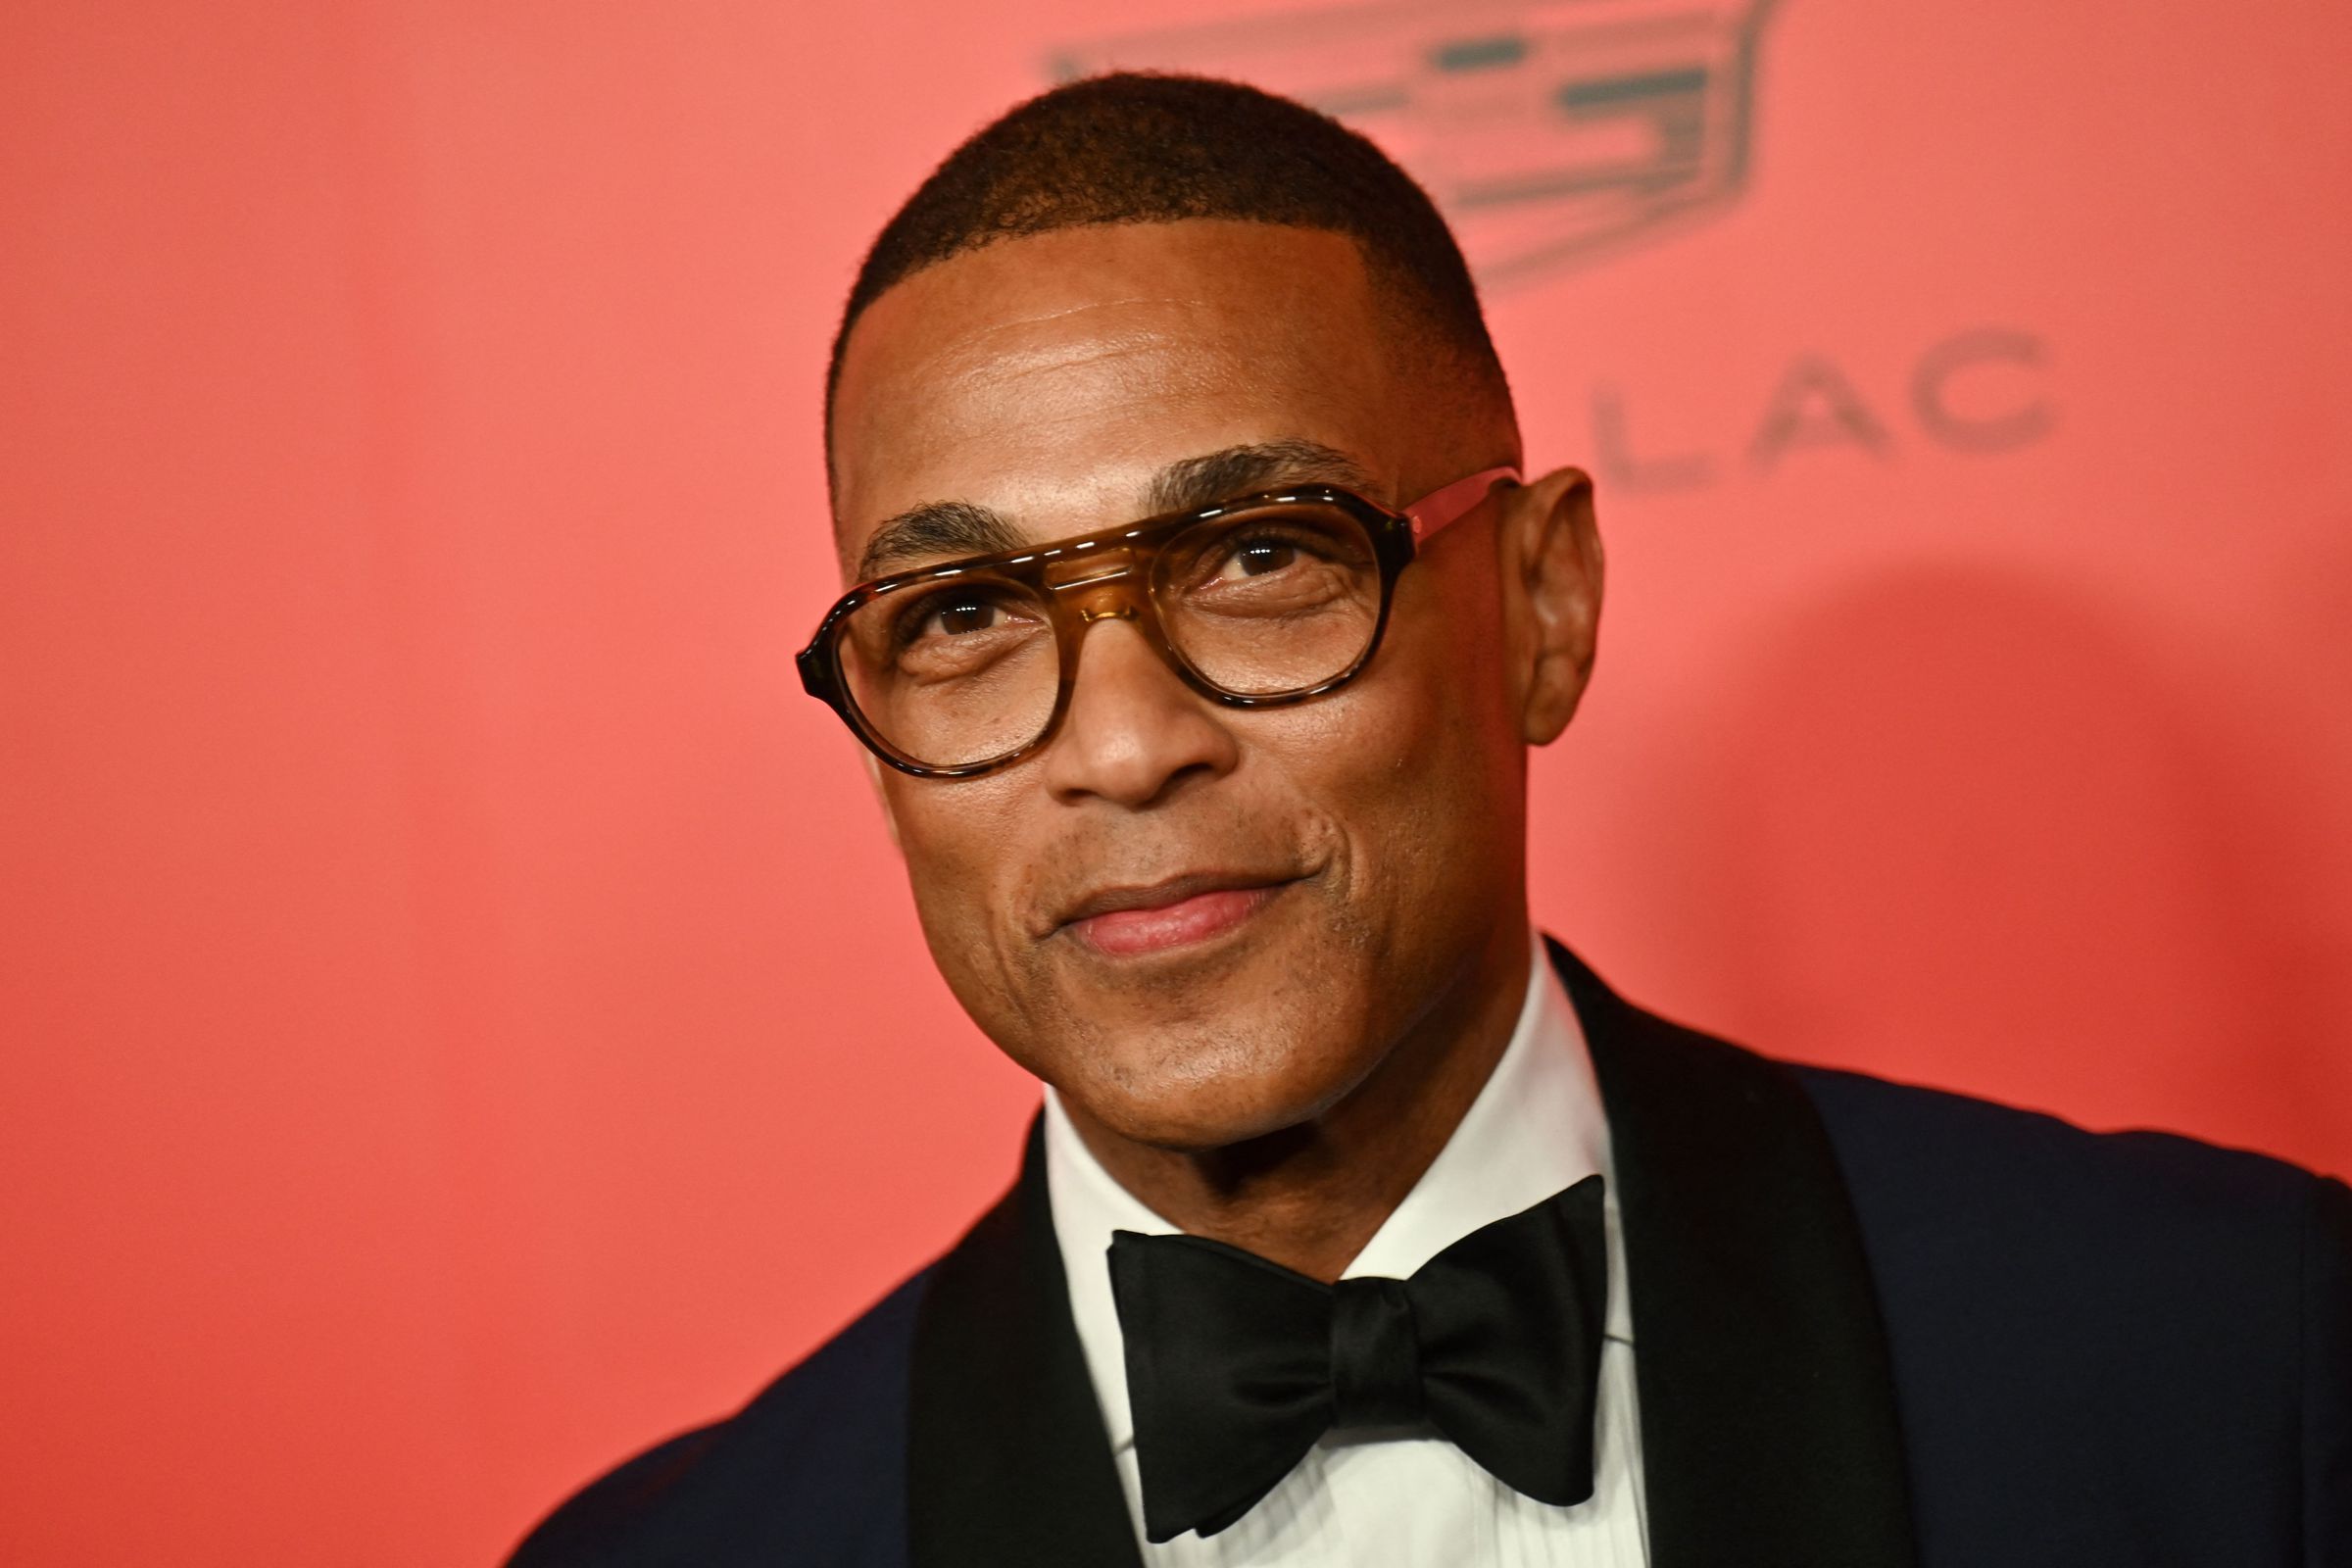 A tight shot of a man in a tuxedo wearing glasses and a bowtie. Behind the man is a red backsplash.